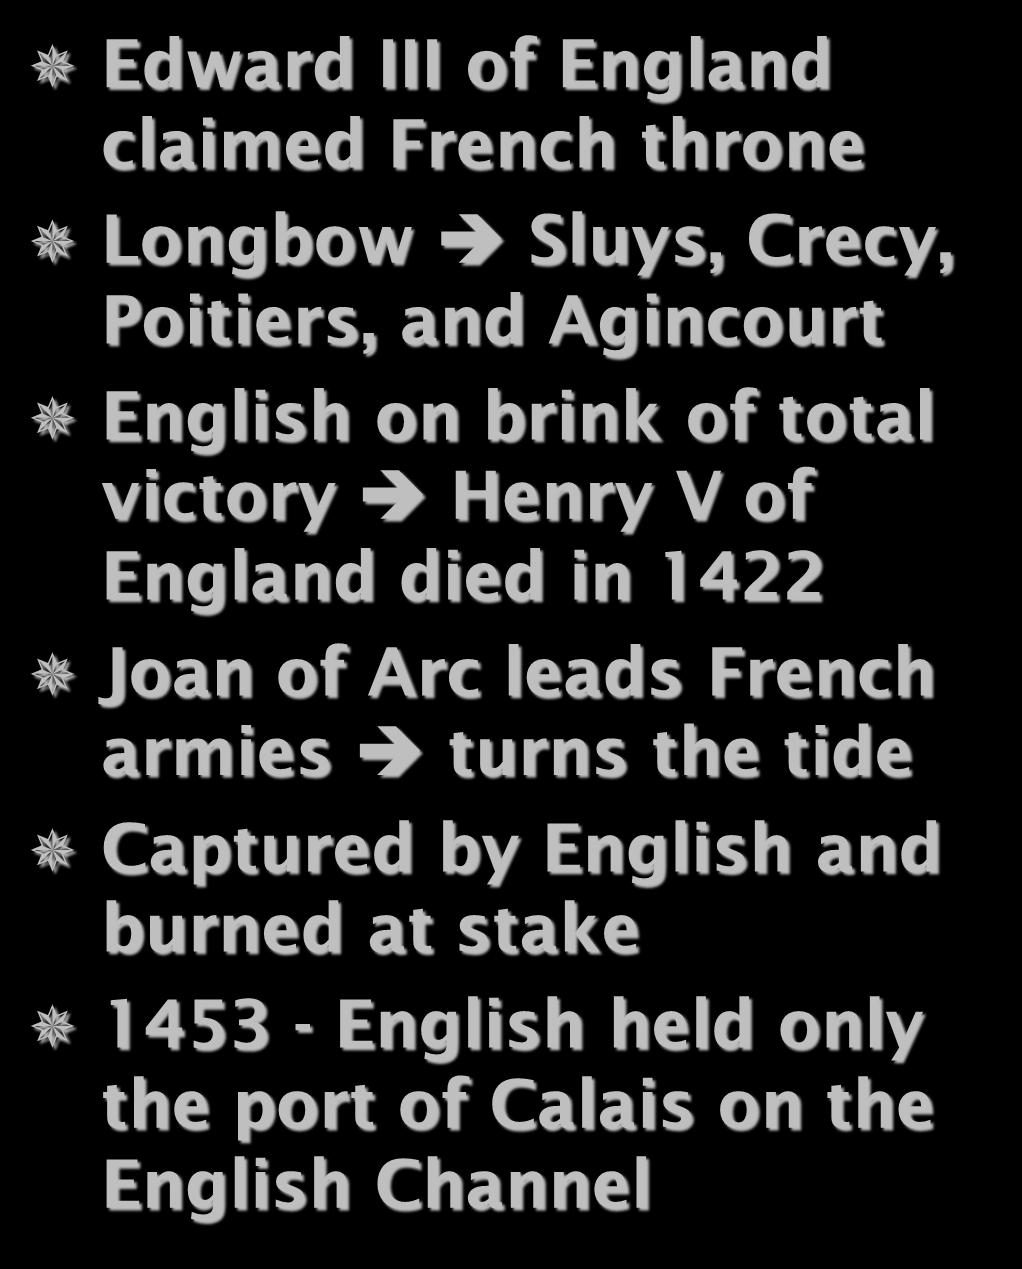 and Agincourt English on brink of total victory Henry V